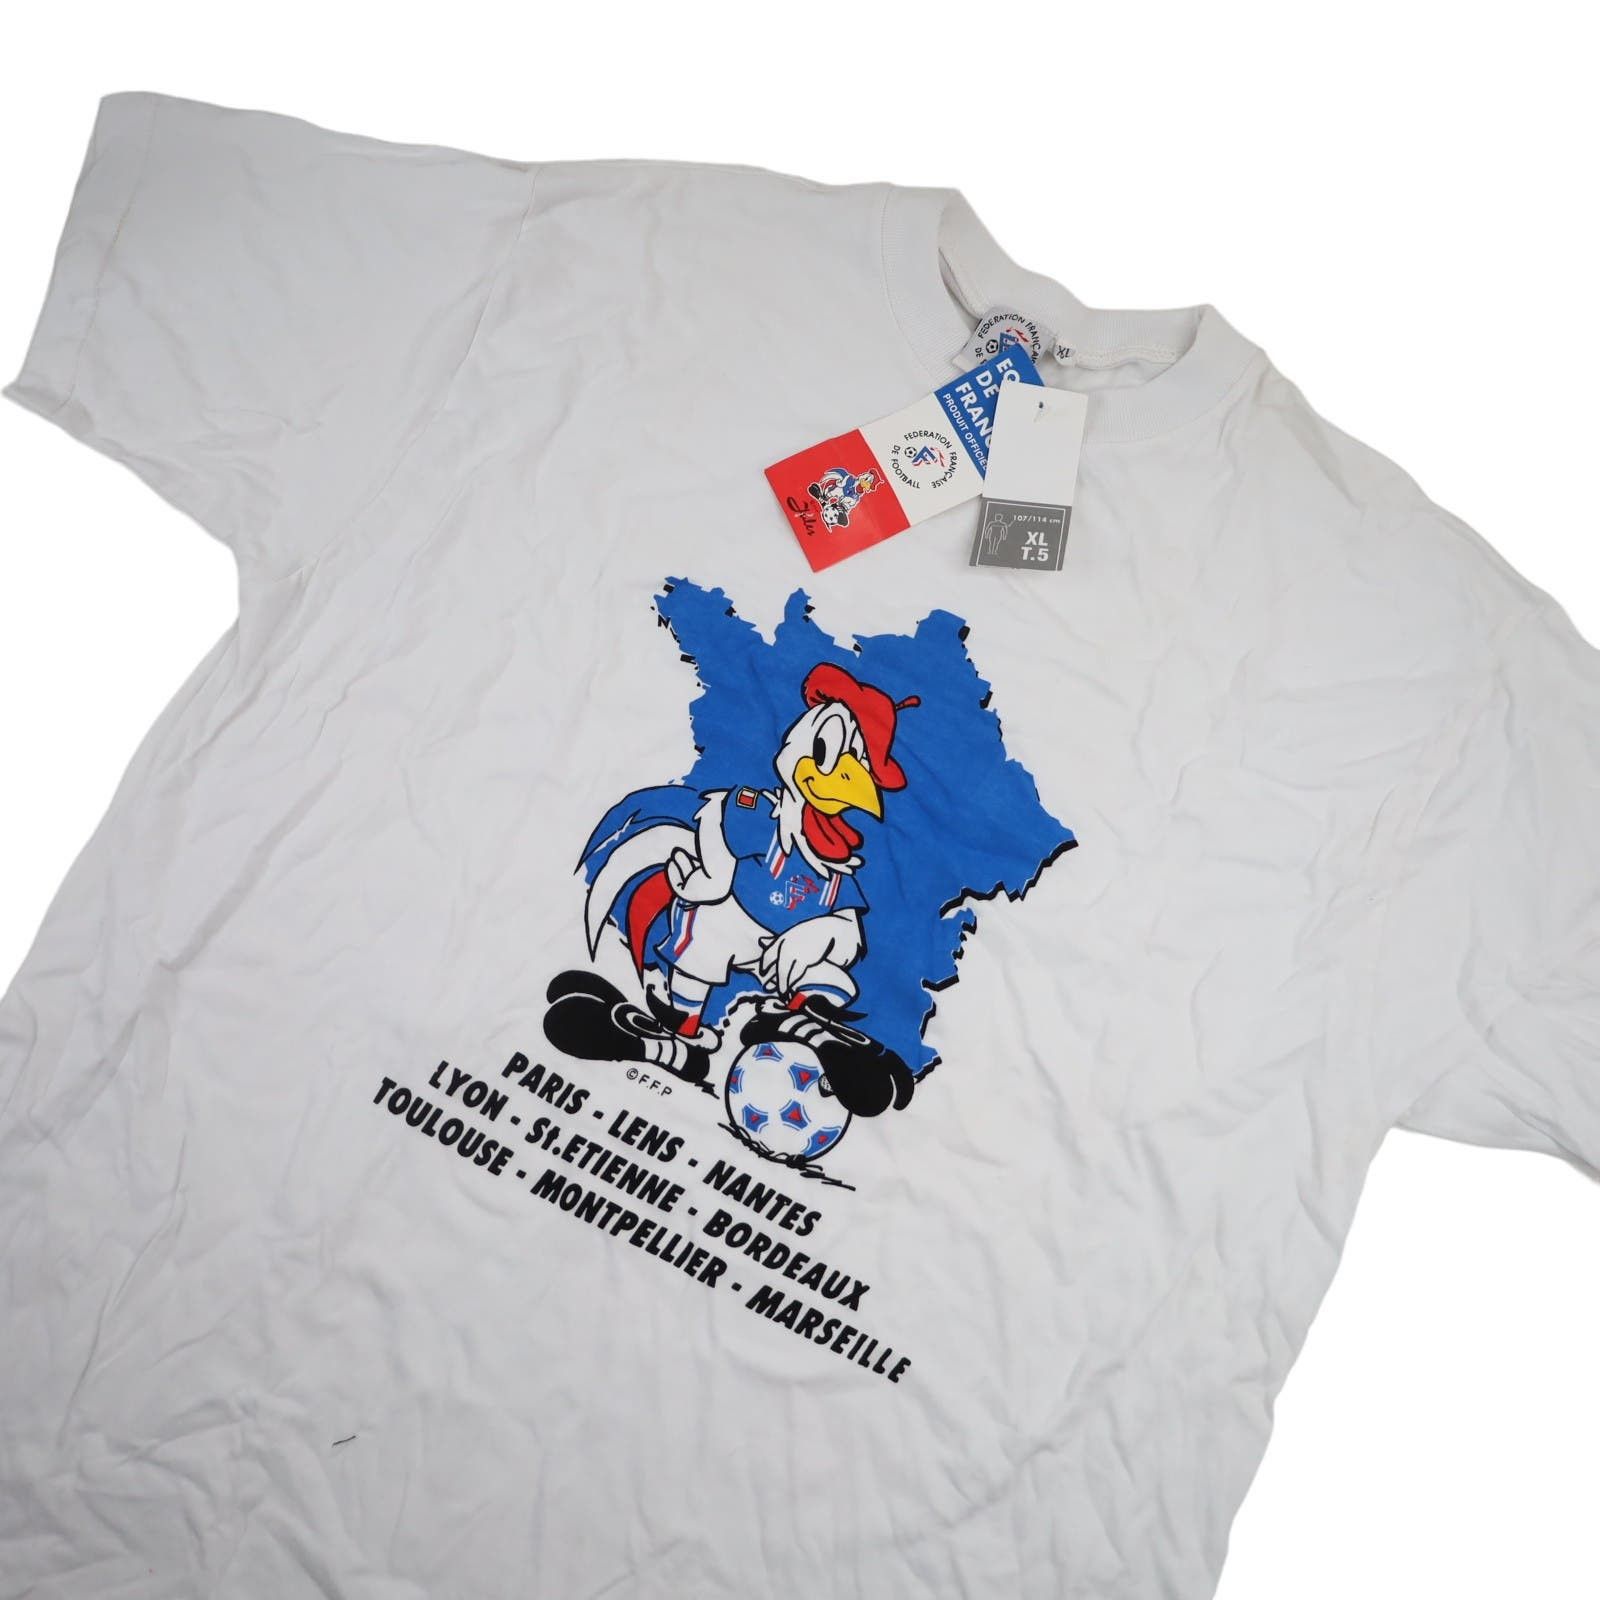 Vintage Vintage NWT Federation of France Football Graphic T Shirt Size US XL / EU 56 / 4 - 2 Preview